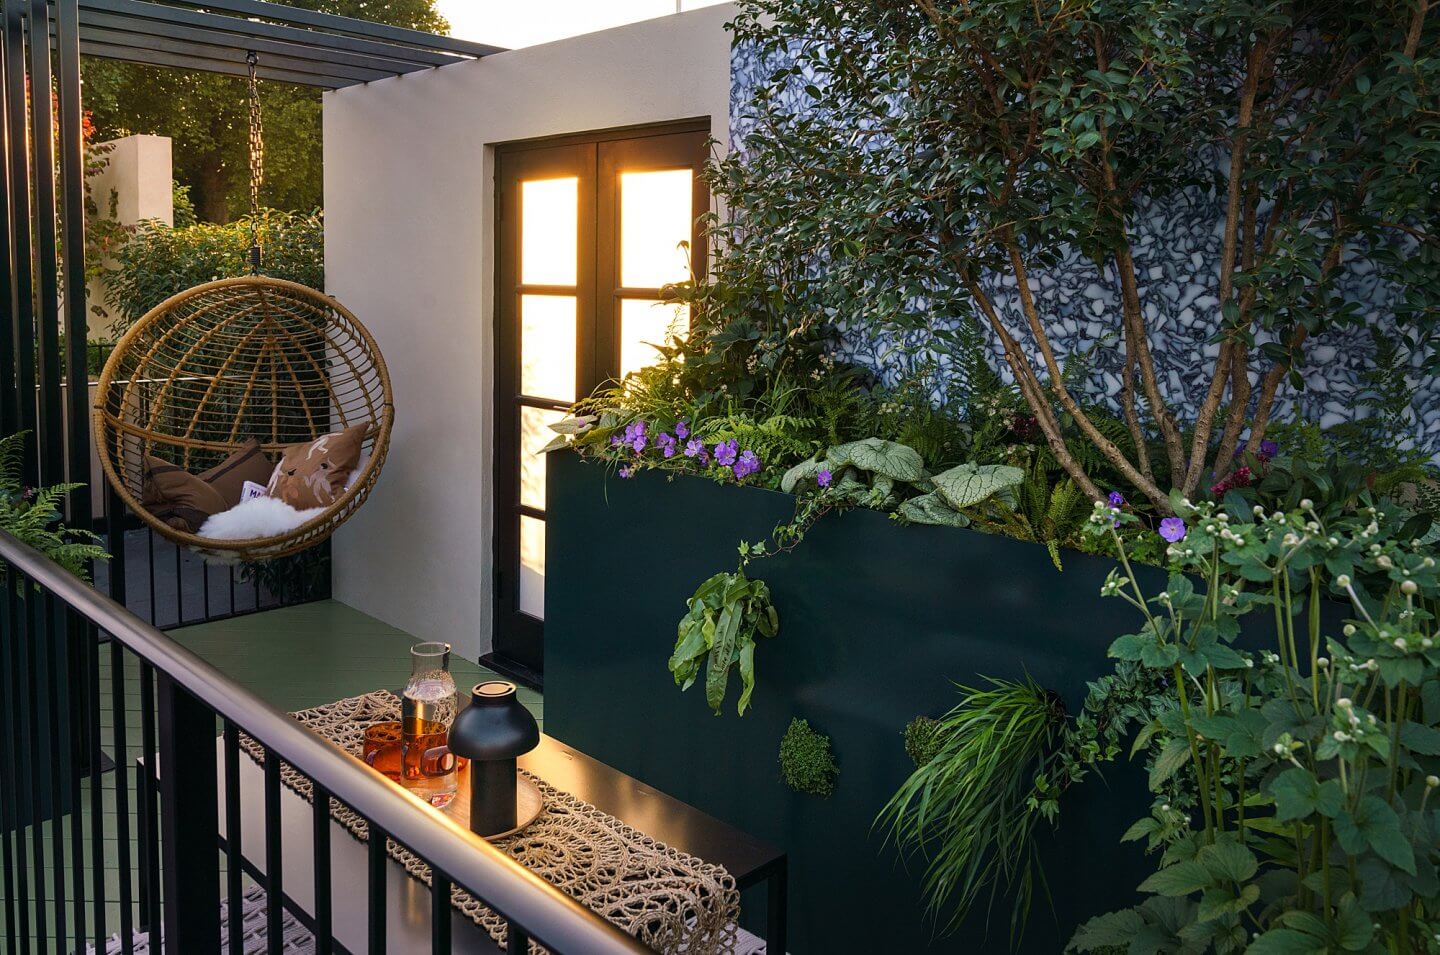 balcony garden with hanging chair at sunset Chelsea Flower Show